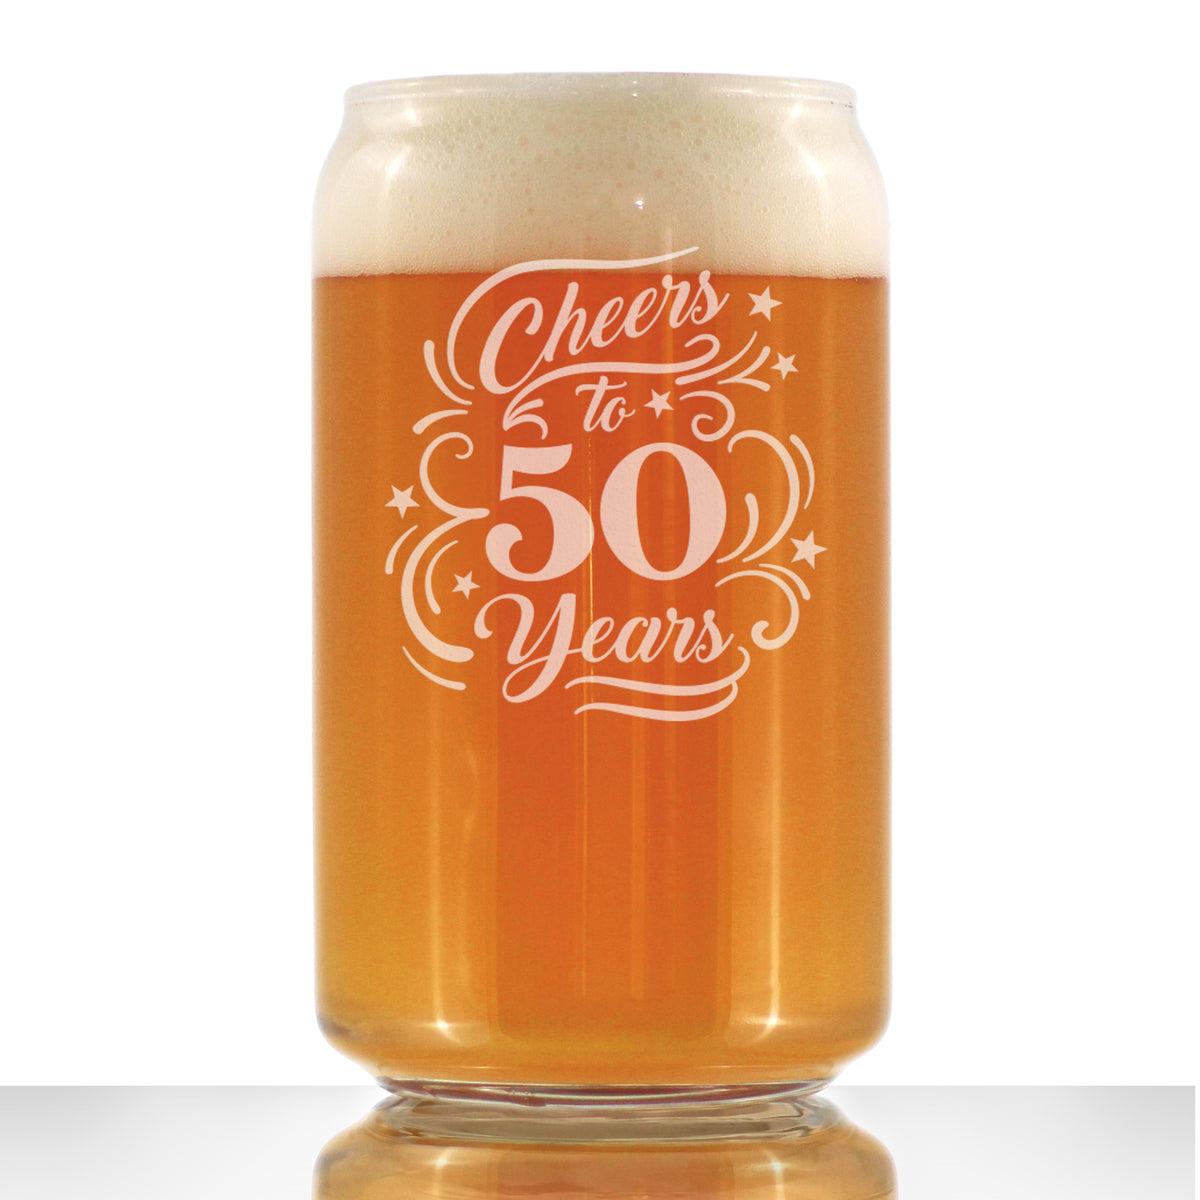 Cheers to 50 Years - Beer Can Pint Glass Gifts for Women &amp; Men - 50th Anniversary Party Decor - 16 Oz Glasses